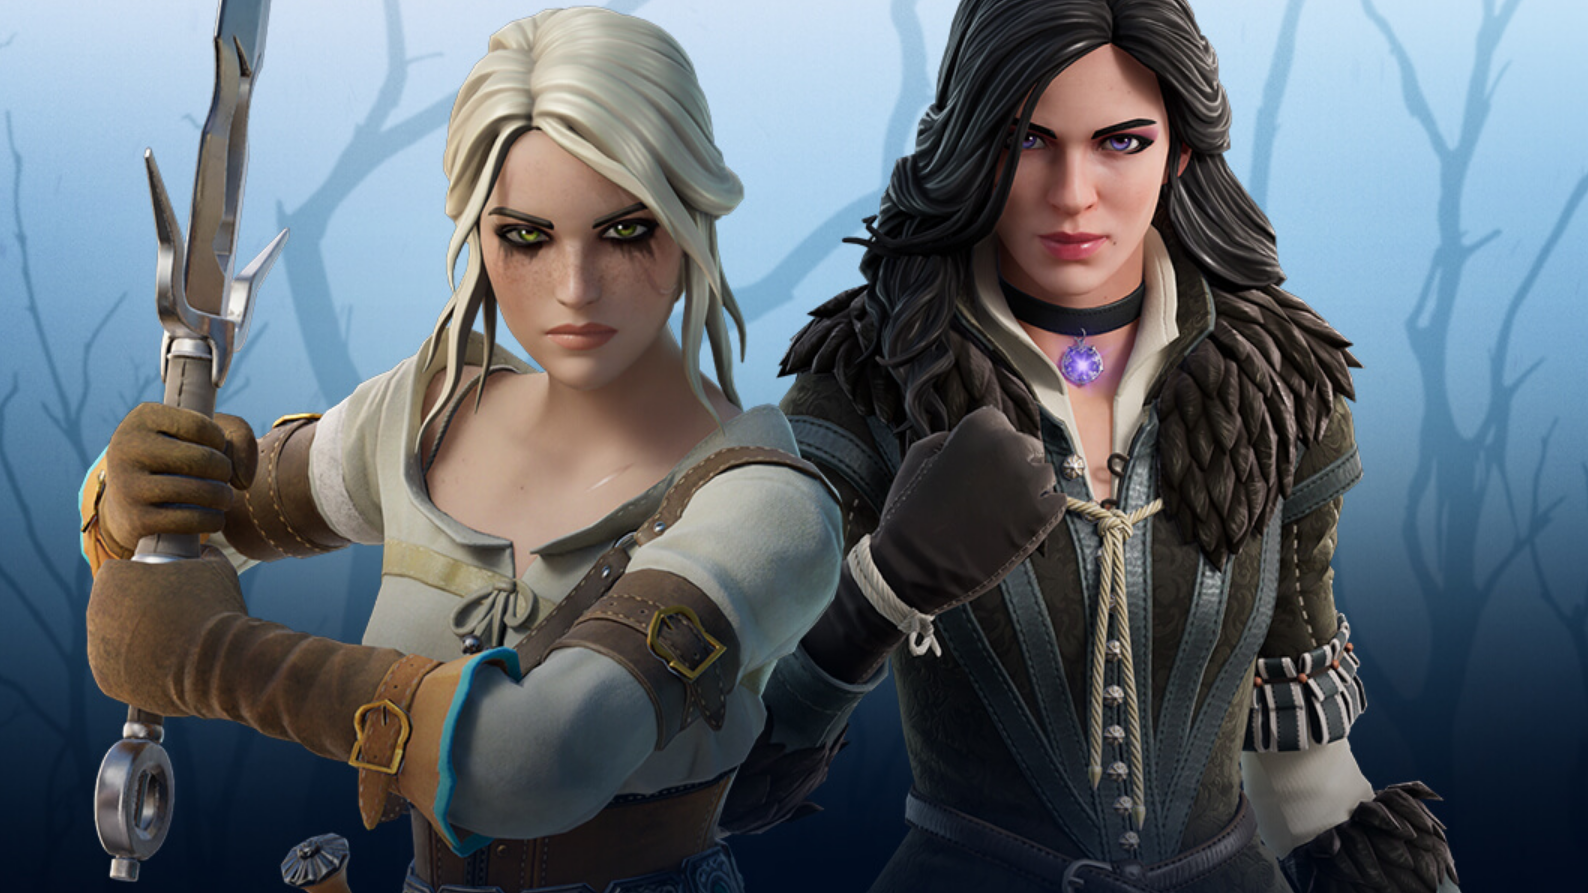 White-haired witcher Ciri wields a sword and black-haired sorceress Yennefer clenches her fist in their Fortnite versions